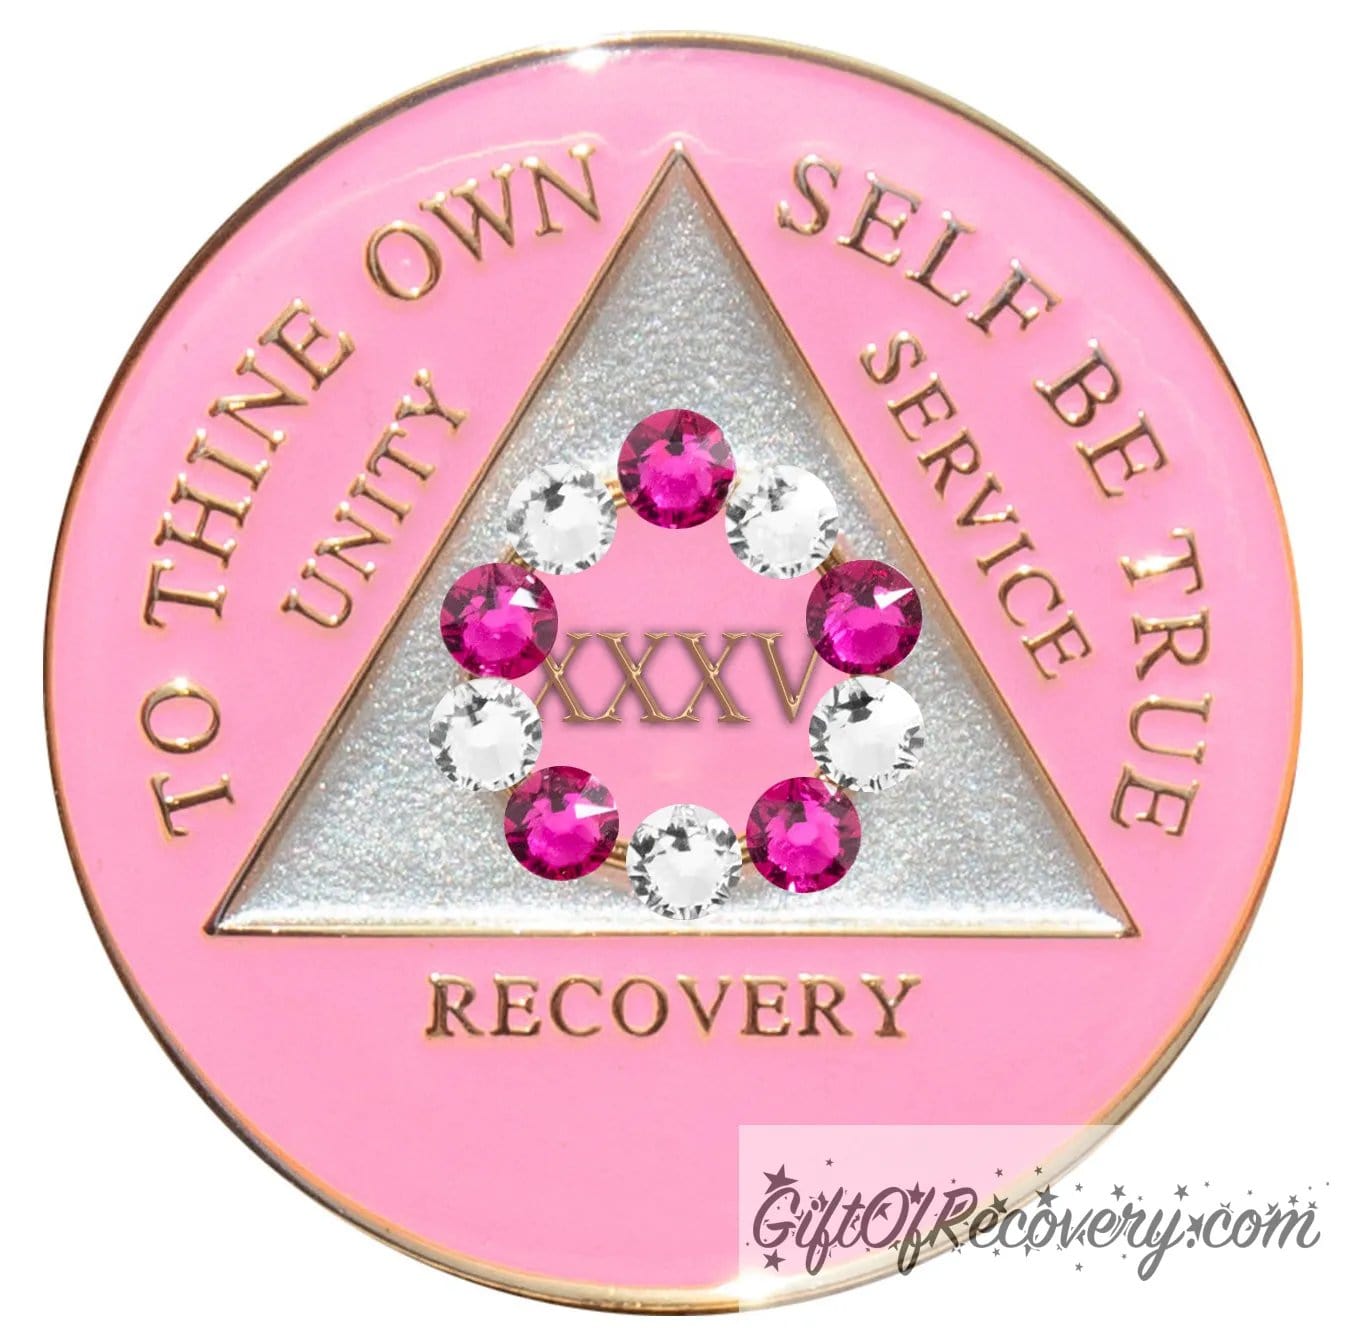 35 year princess pink AA medallion with a pearl white triangle center and pink circle, surrounding the roman numeral 35 are 10 genuine crystals, 5 dark pink and 5 clear, perfect for your favorite sober princess, to thine own self be true, unity, service, recovery, the rim of the medallion, the raised triangle outline, and the roman numeral year, are in 14k gold, sealed with resin for a glossy finish.